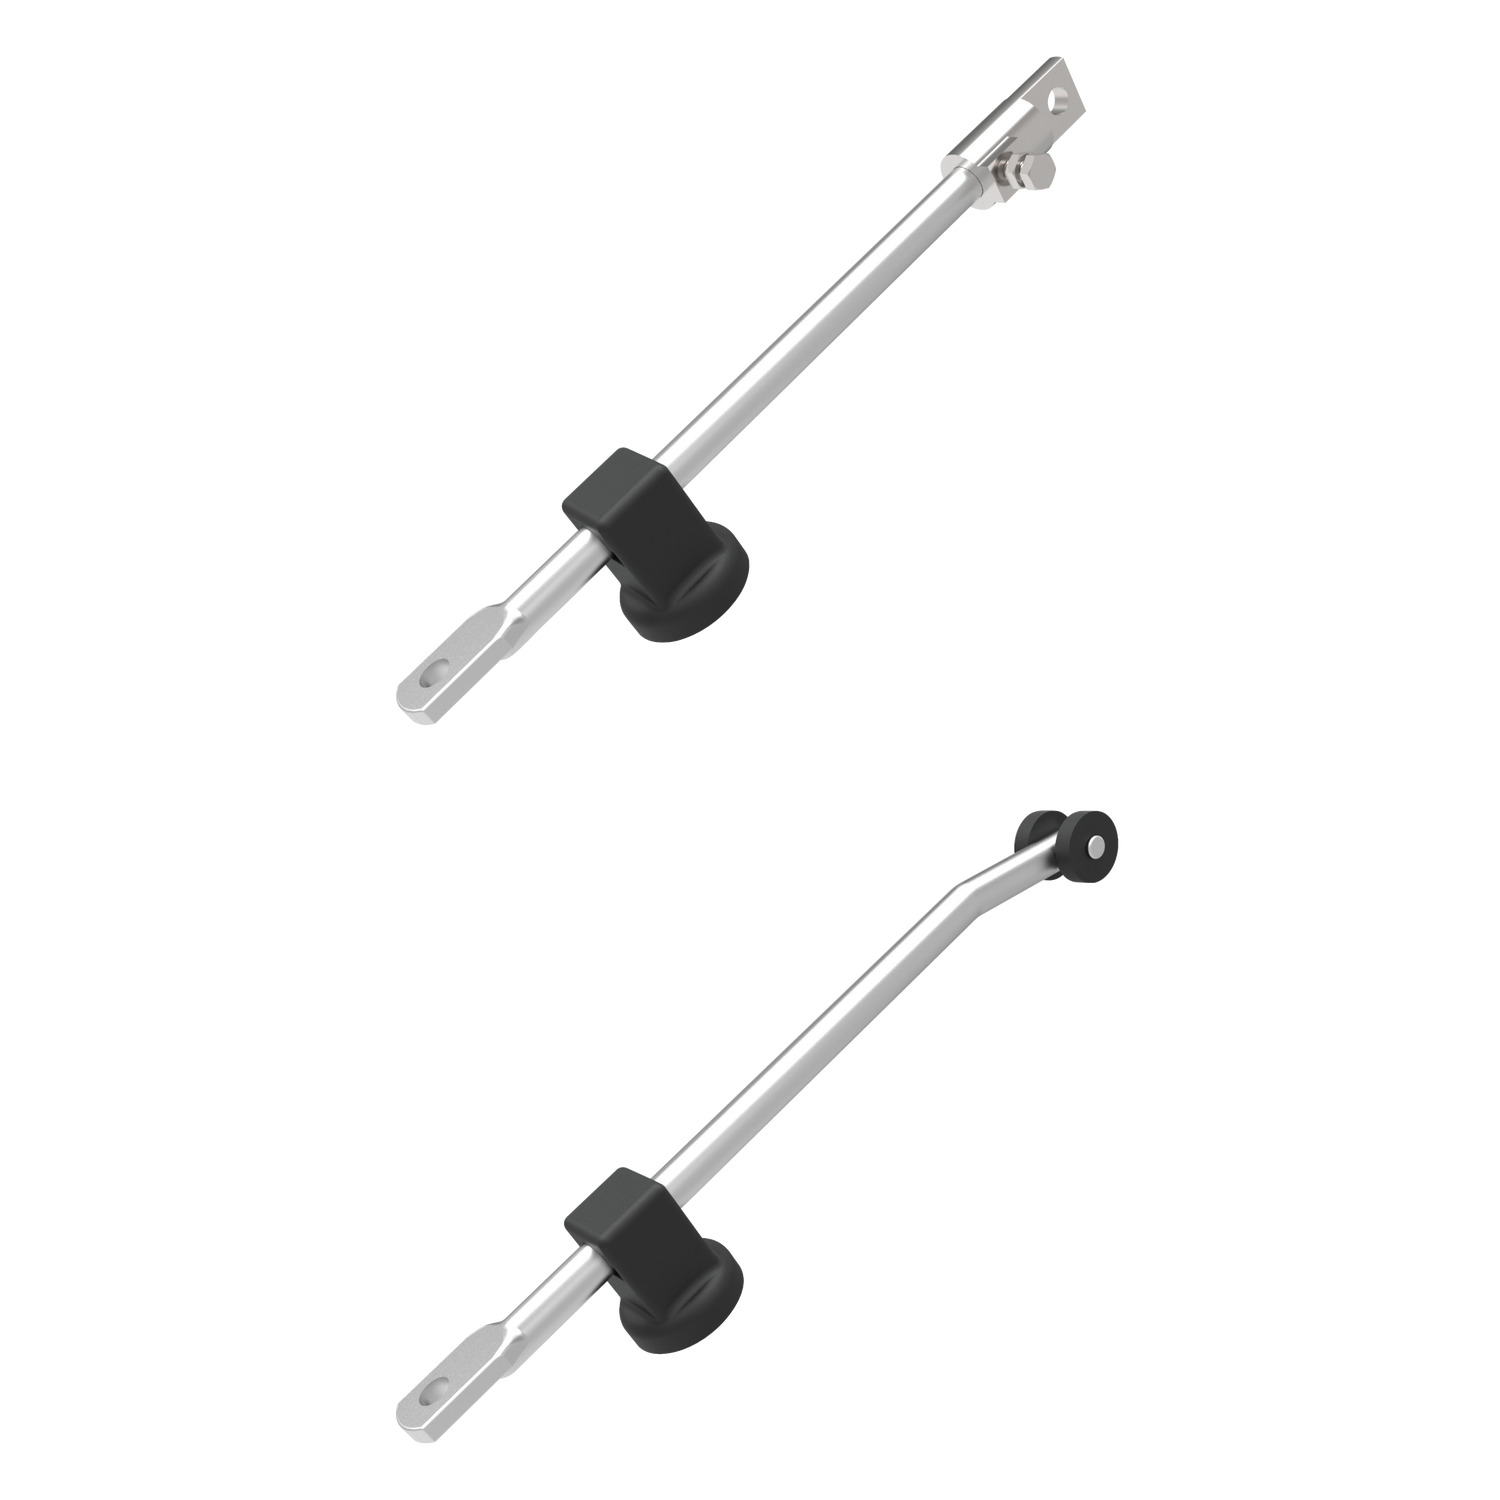 A0303.AW0862 Multi-Point Latching round rod - Guide One - Polyamide Plastic, Black